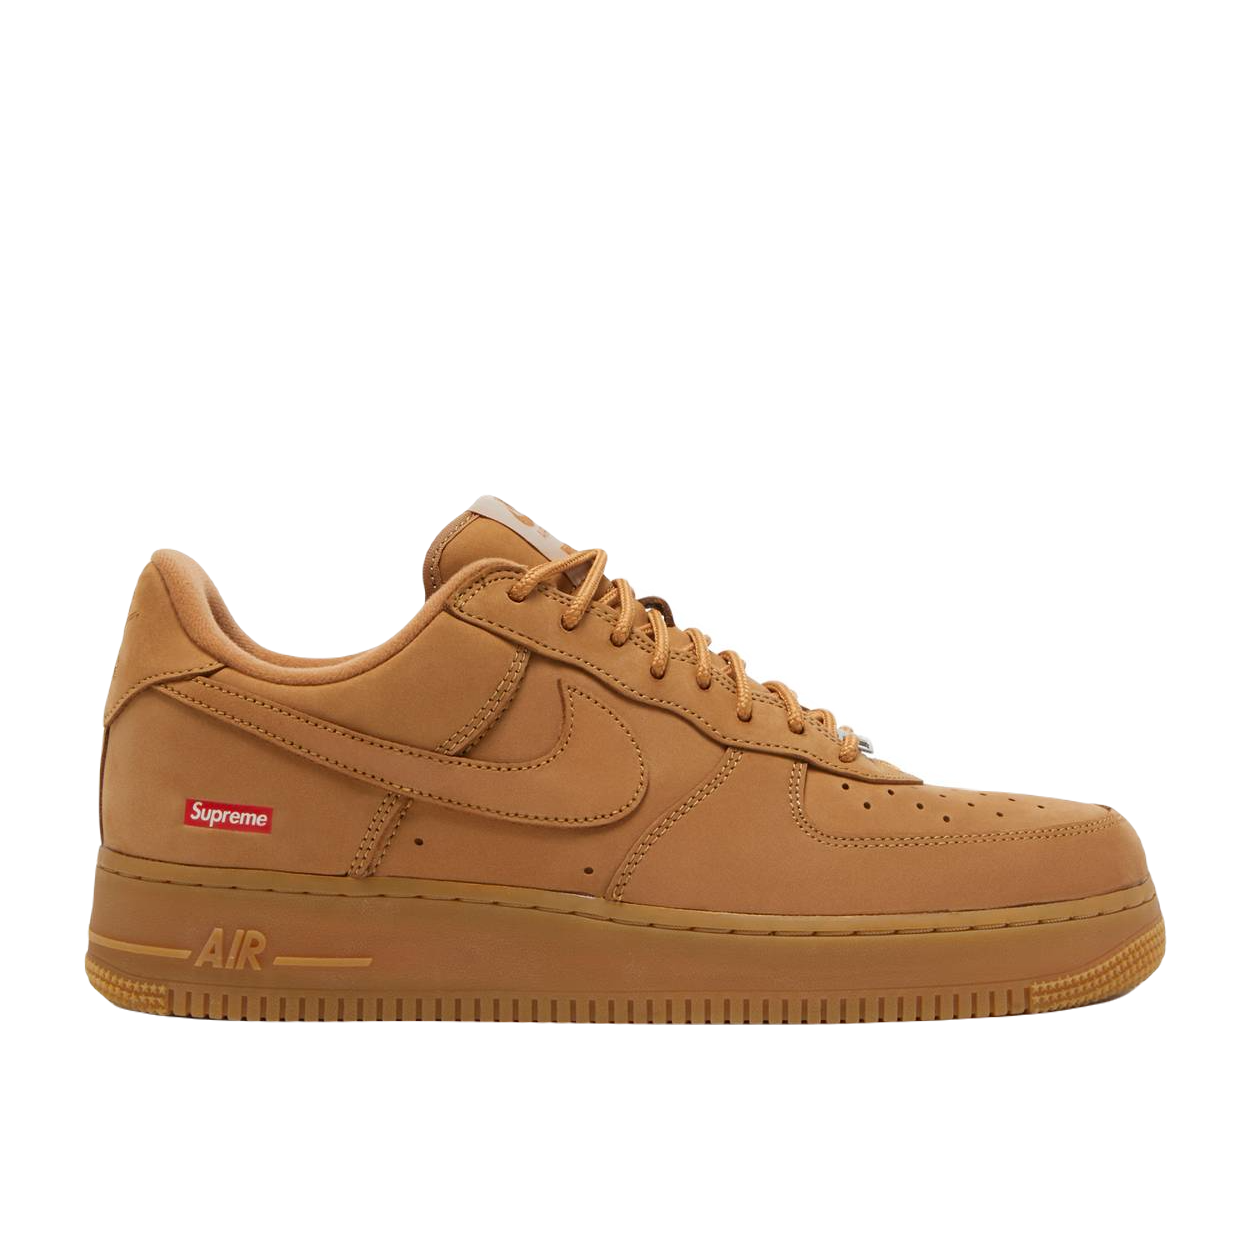 Air Force 1 Low W SP x Supreme - Wheat